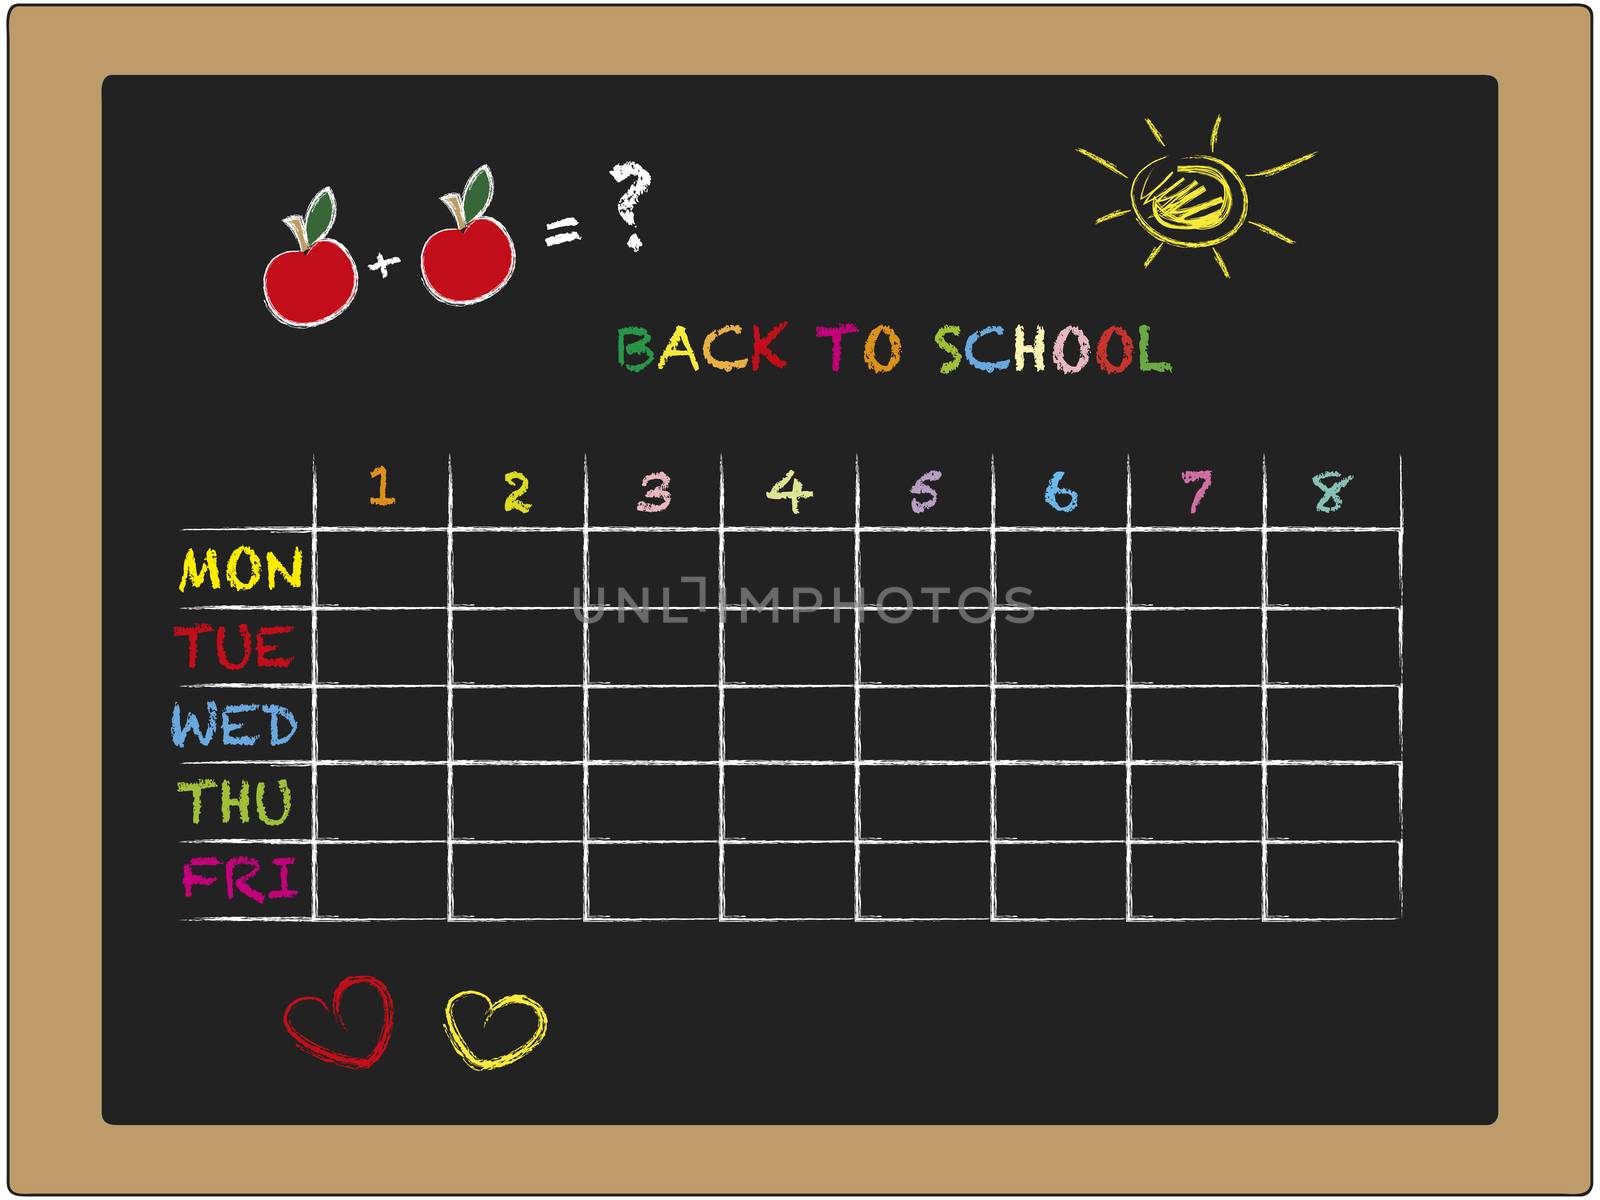 school timetable by millaus